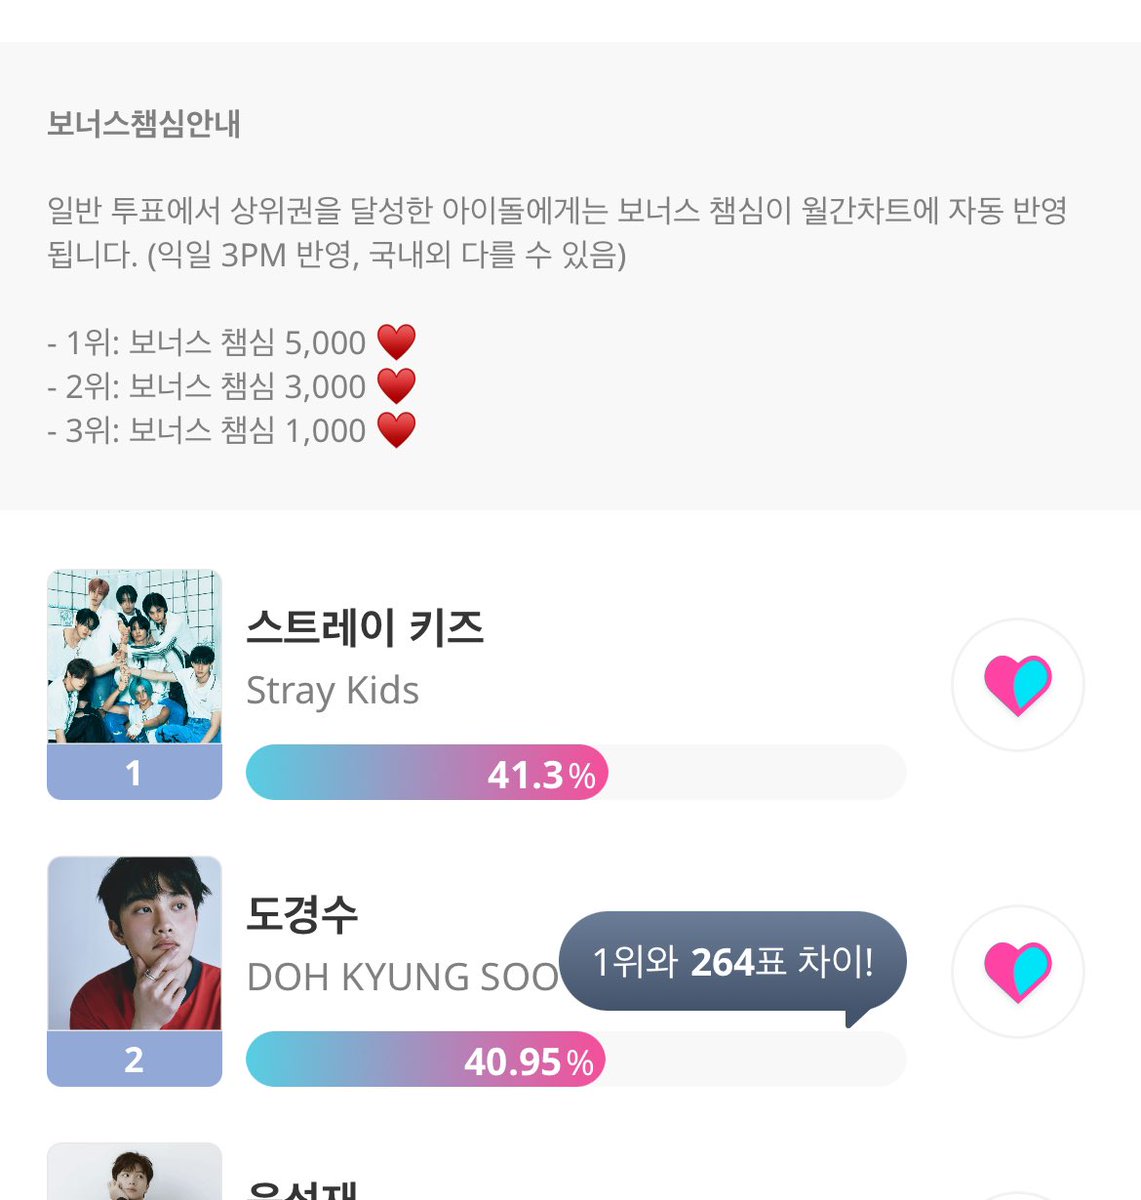 Vote for DoKyungSoo🏹
ㅠㅠㅠㅜ 투표해주세여